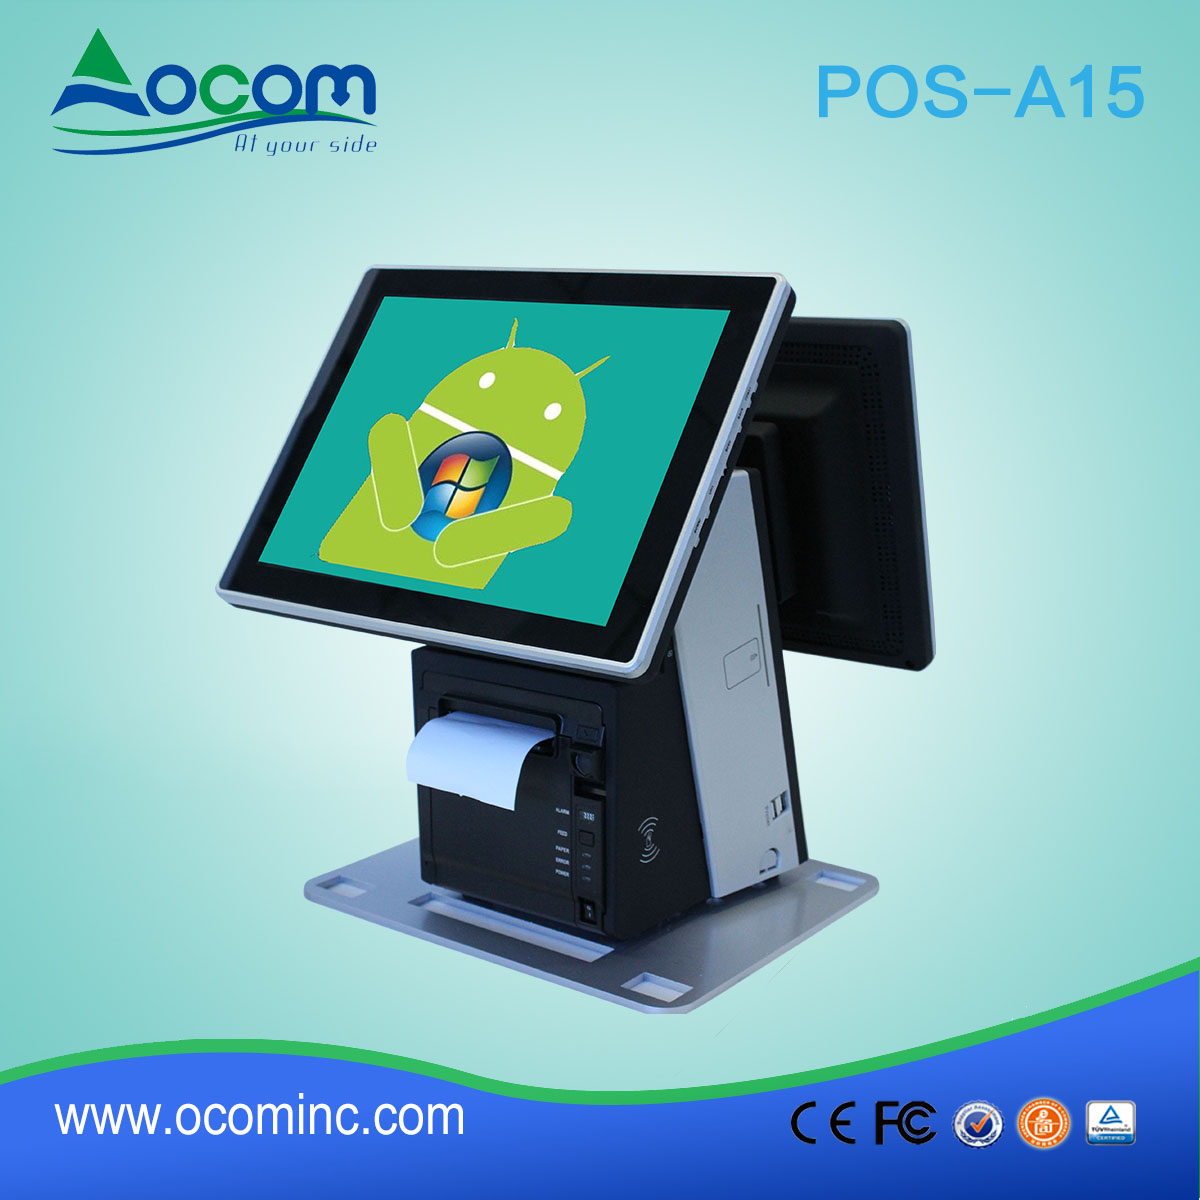 69 Restaurant 2 Touch Screen POS oder System